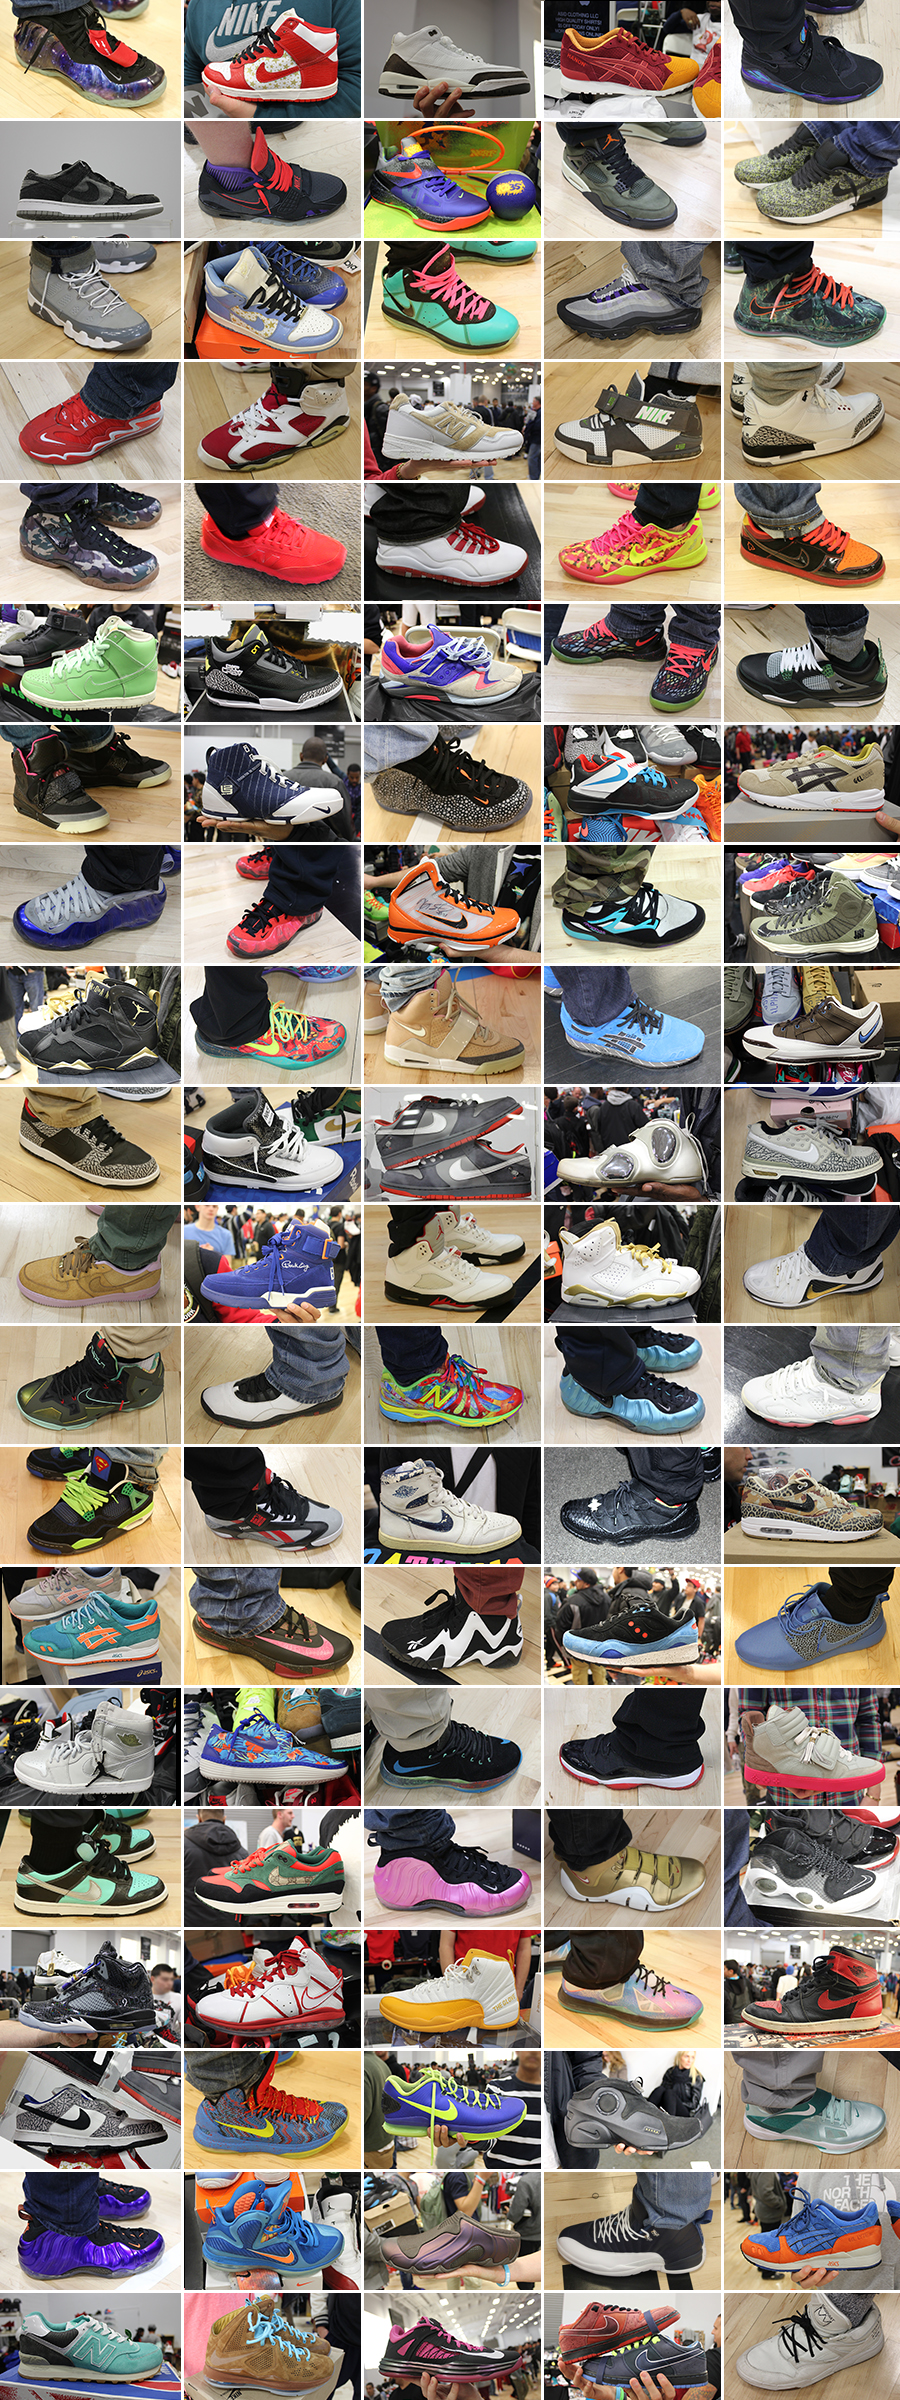 500 Shoes At Sneaker Con 05